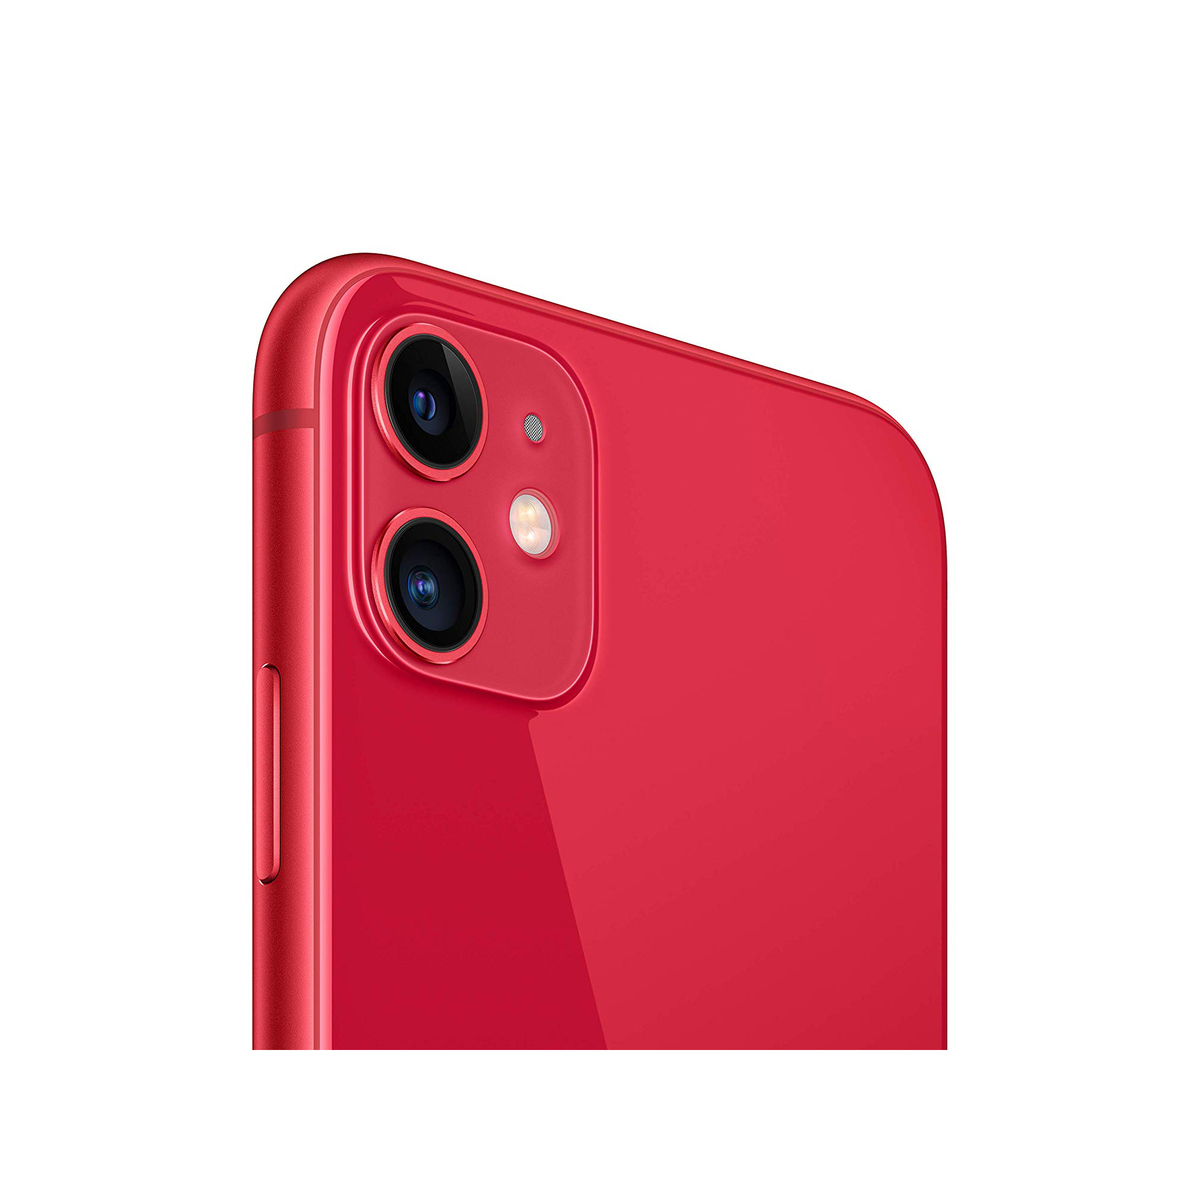 Apple iPhone 11 64GB PRODUCT(Red)